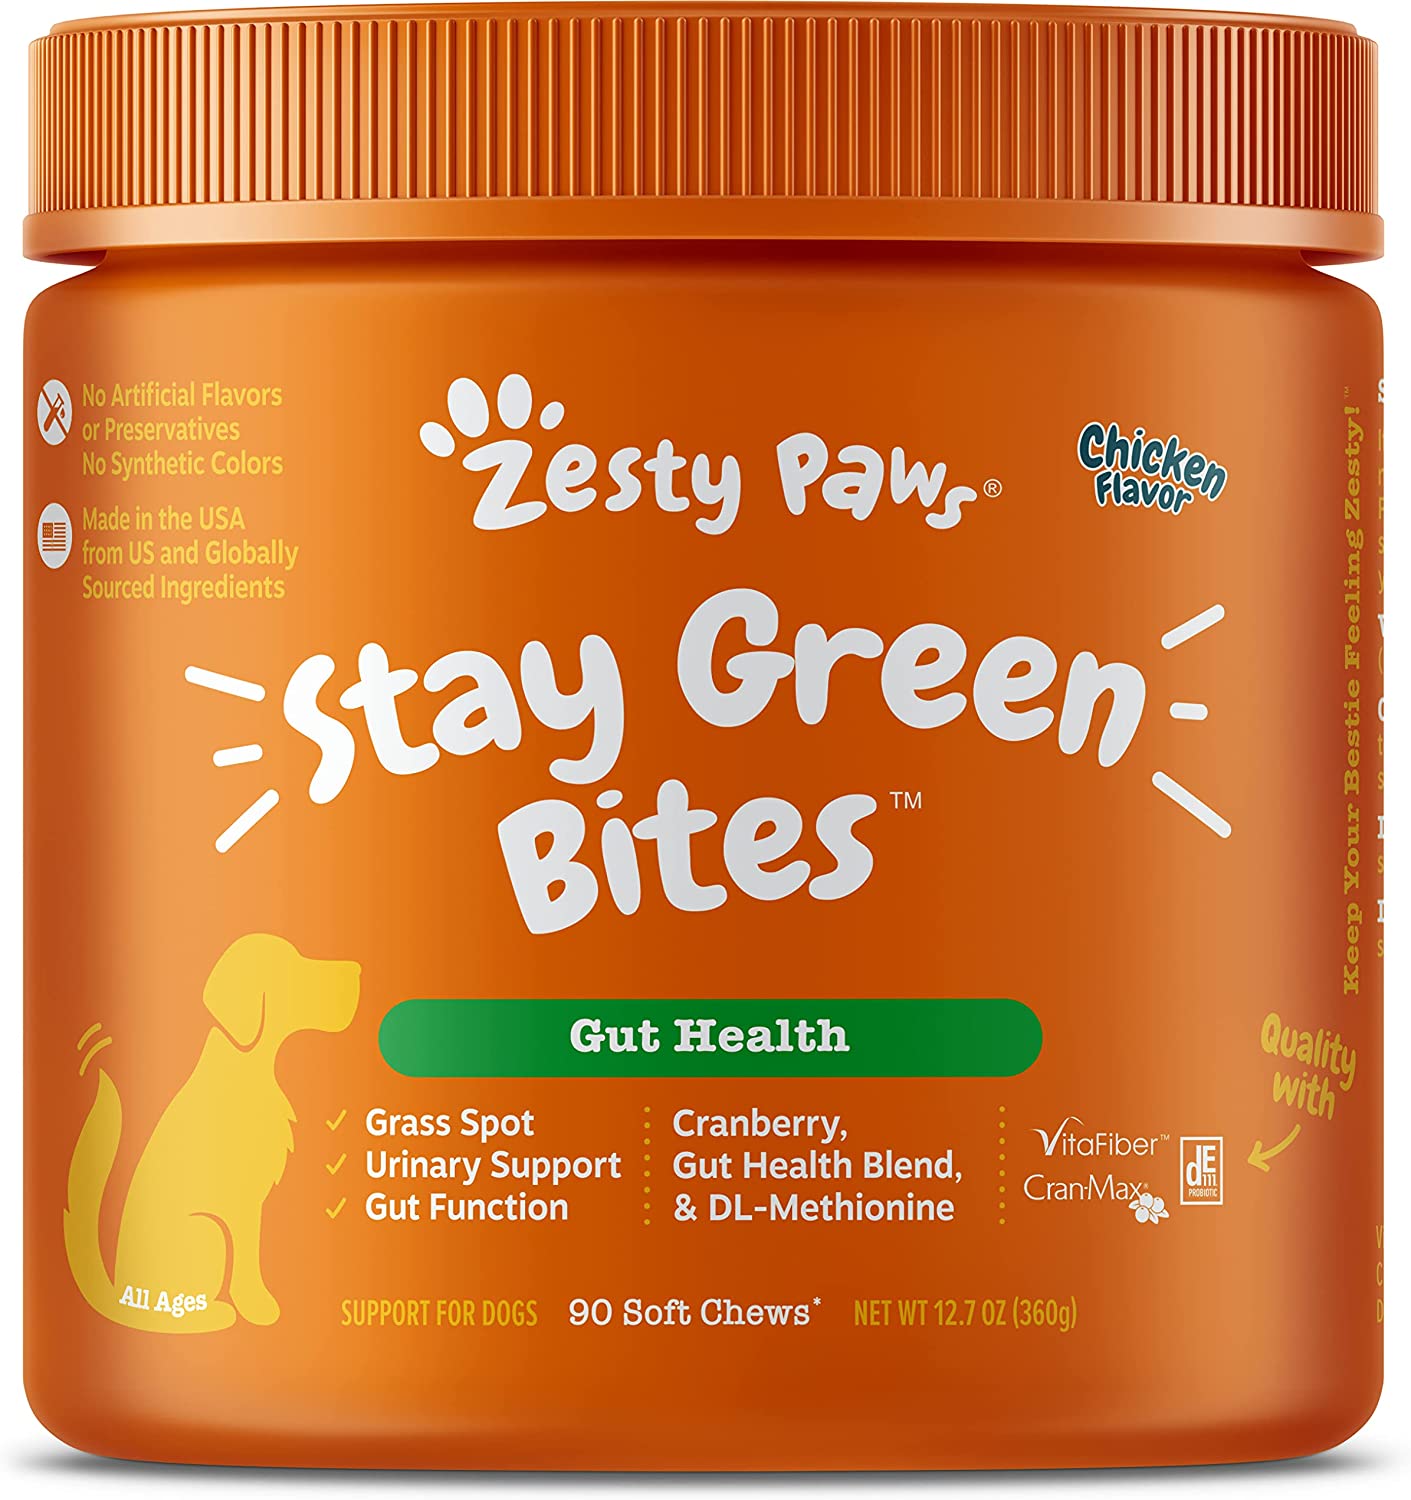 1. Zesty Paws Stay Green Bites for Dogs